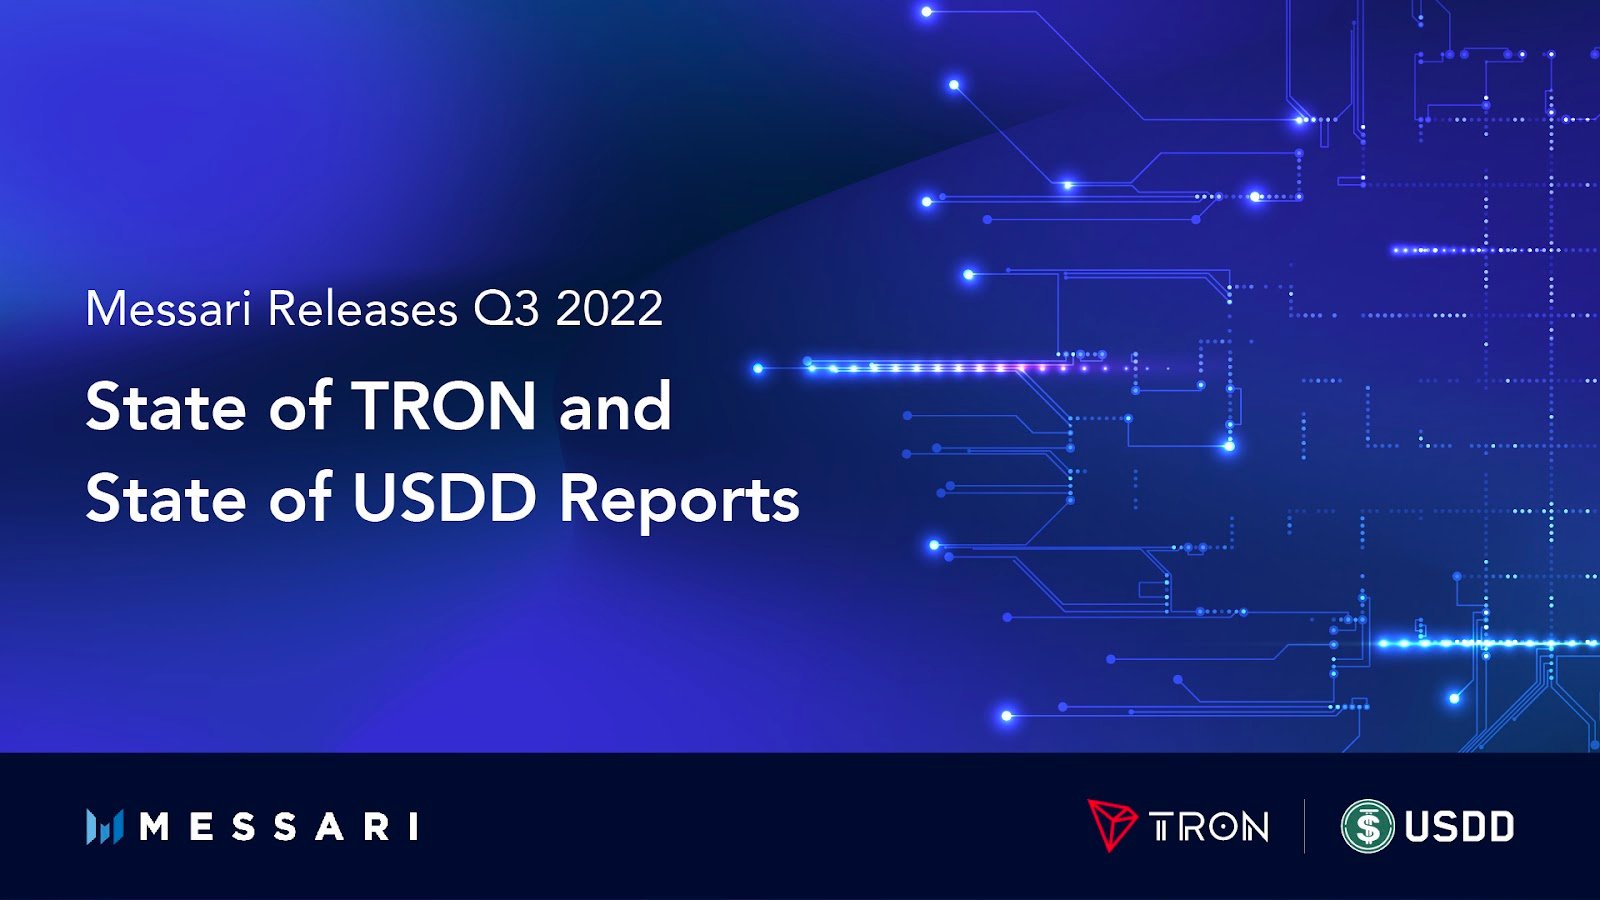 Messari Releases Q3 2022 State of TRON and State of USDD Reports – Sponsored Bitcoin News